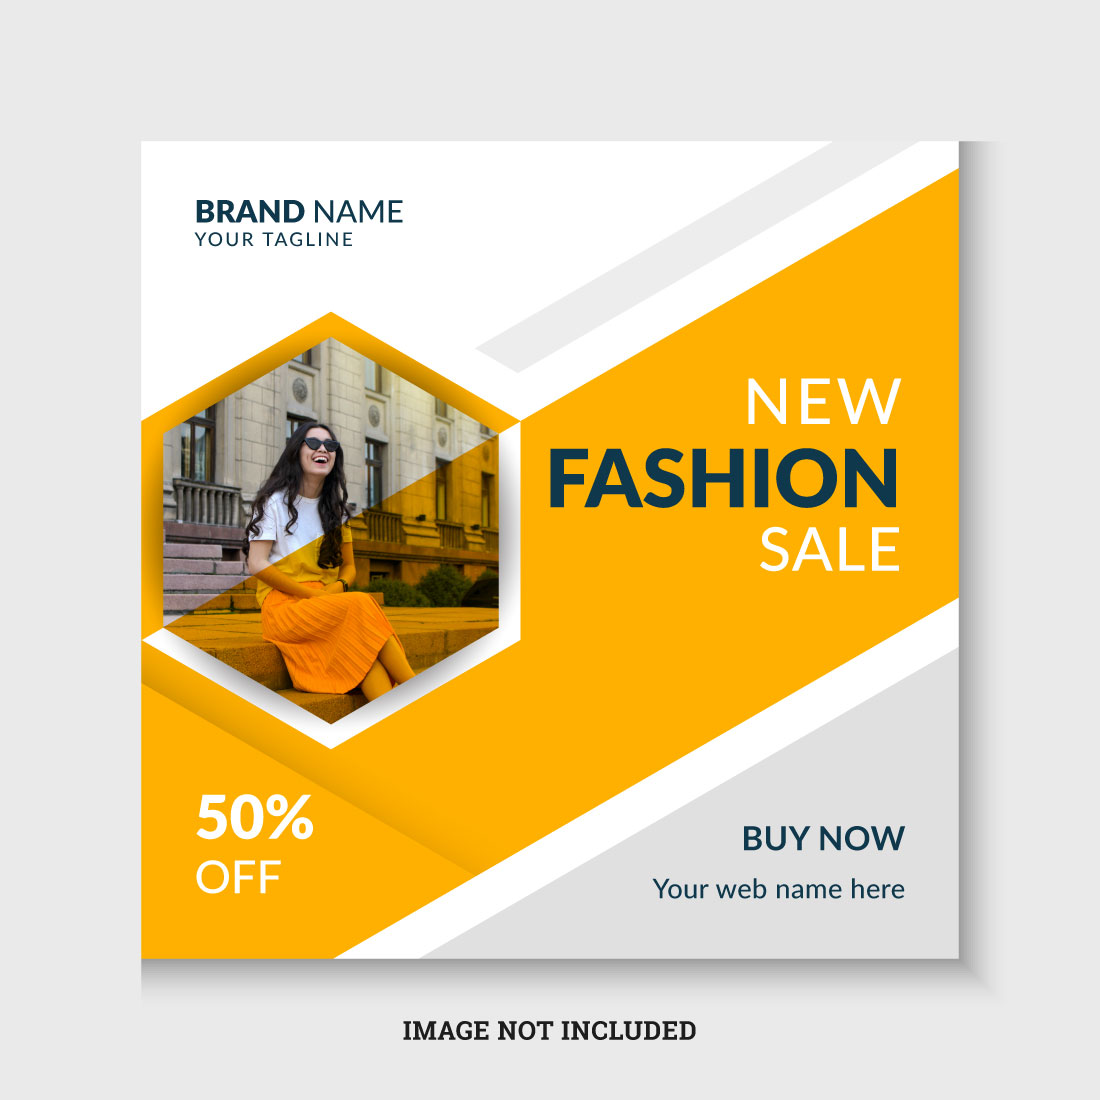 Fashion sale social media post and web banner design template cover image.